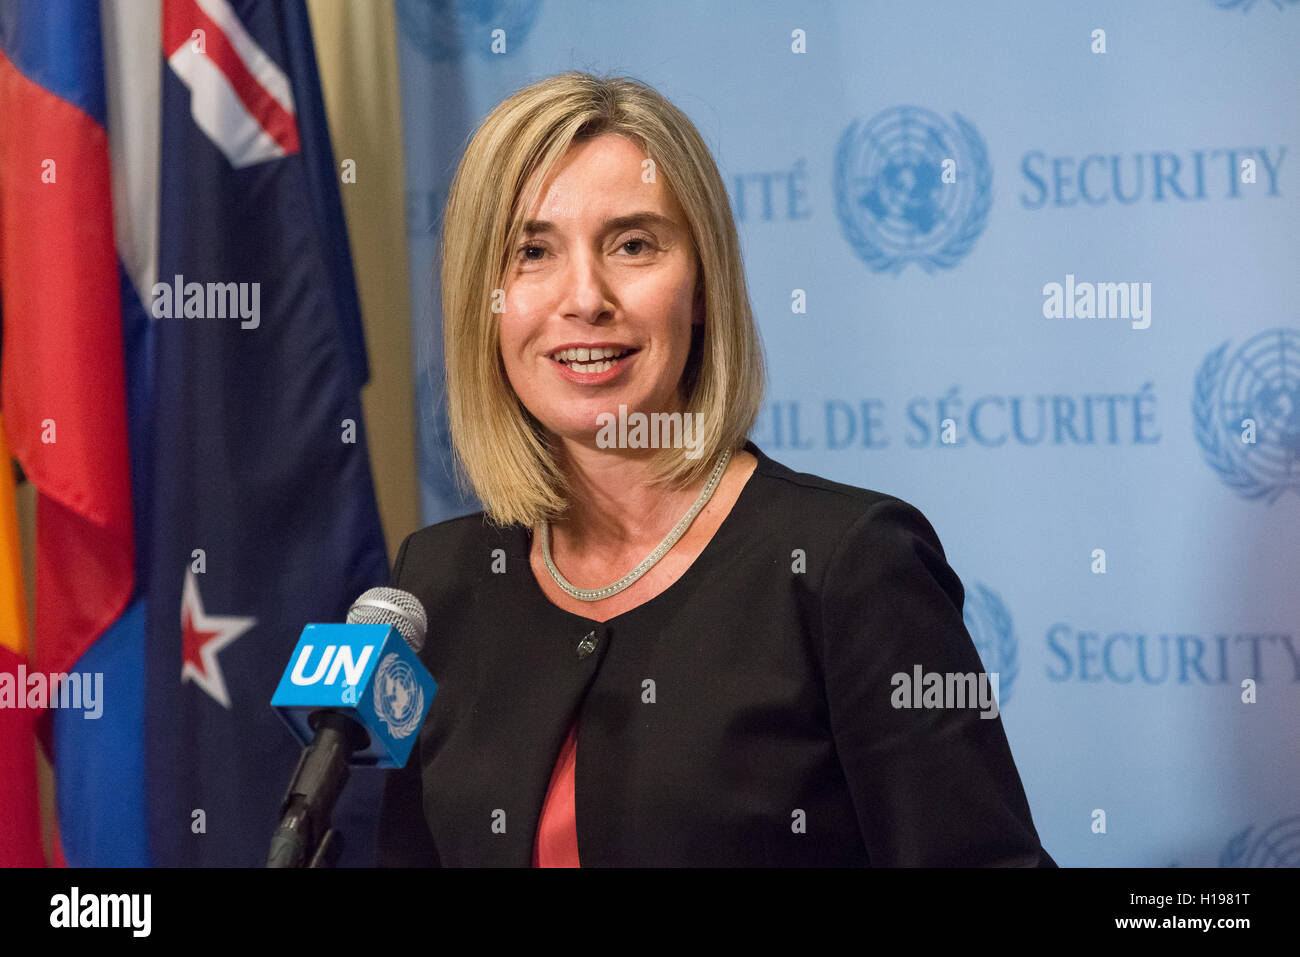 New York, United States. 22nd Sep, 2016. Following a meeting of the E3 3 - comprised of ministers from France Germany, U.K., United States, Russia, and China -- with Iranian Foreign Minister Zarif in the United Nations Security Council chamber, European Union High Representative Federica Mogherini spoke with the press regarding implementation and review of the Iran nuclear agreement, at UN Headquarters in New York. © Albin Lohr-Jones/Pacific Press/Alamy Live News Stock Photo